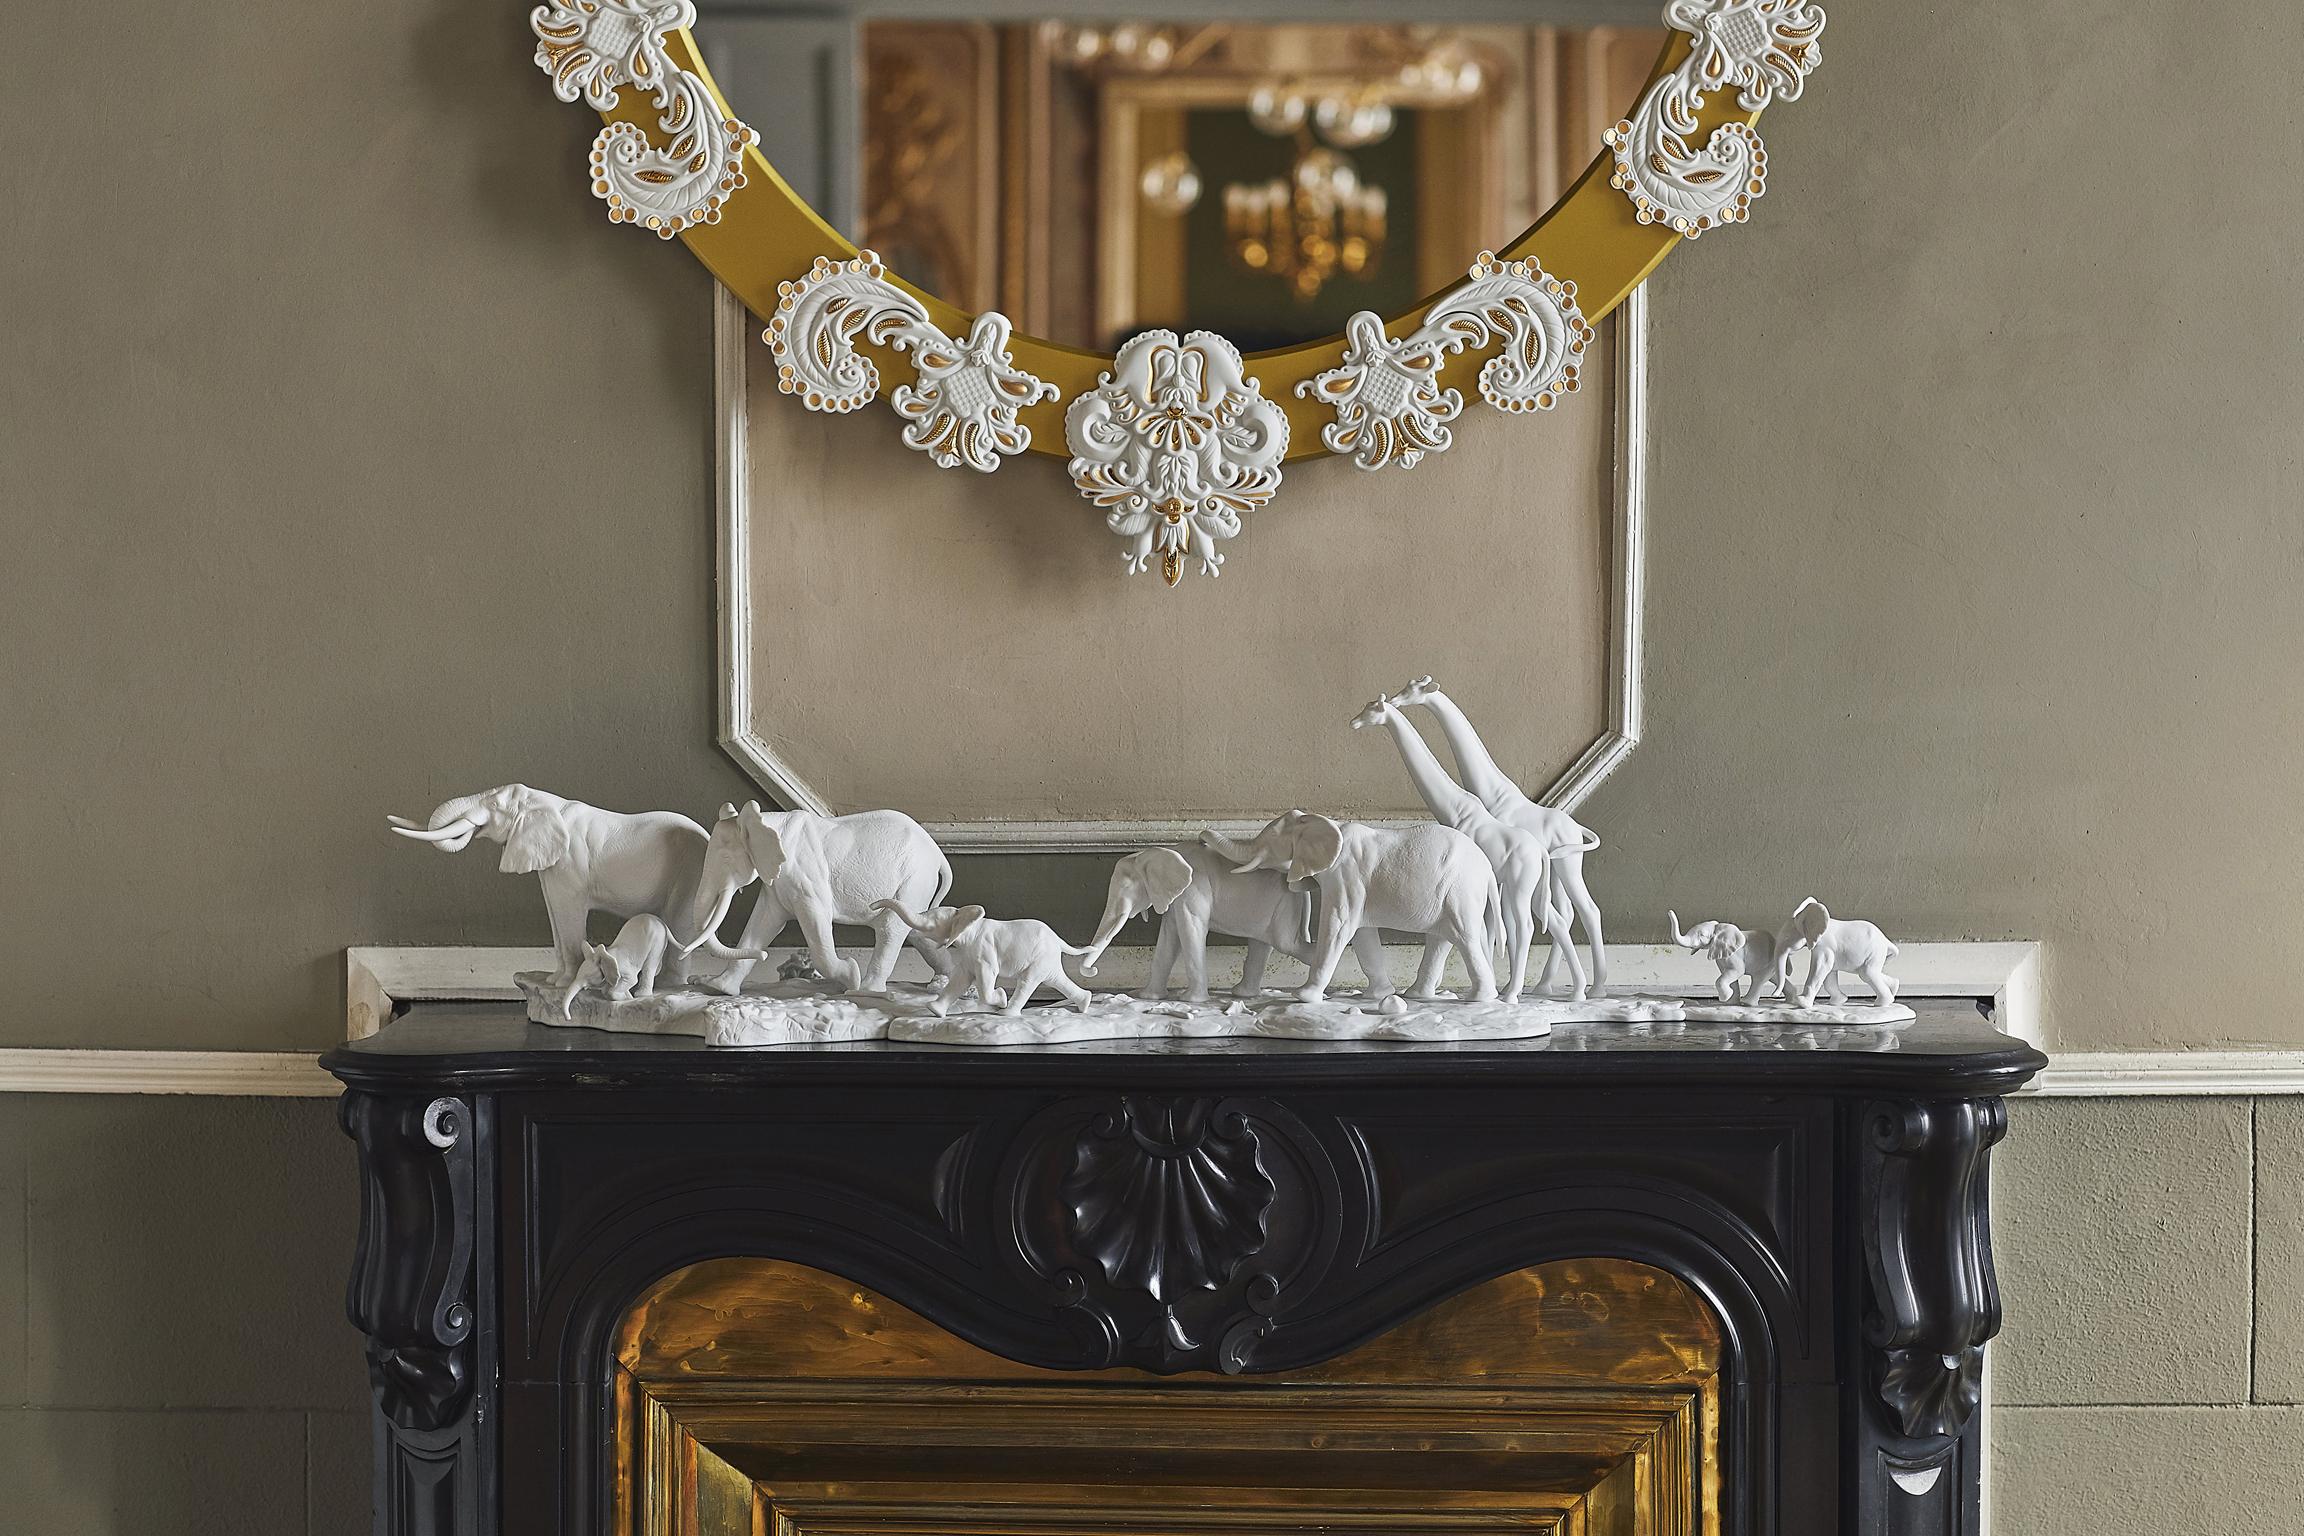 Sculpture in matte white porcelain animals from African savannah, adult female elephant that guides her group through a long path with an iroko wooden base. As an African proverb says: If you want to go fast, go alone. If you want to go far, go in